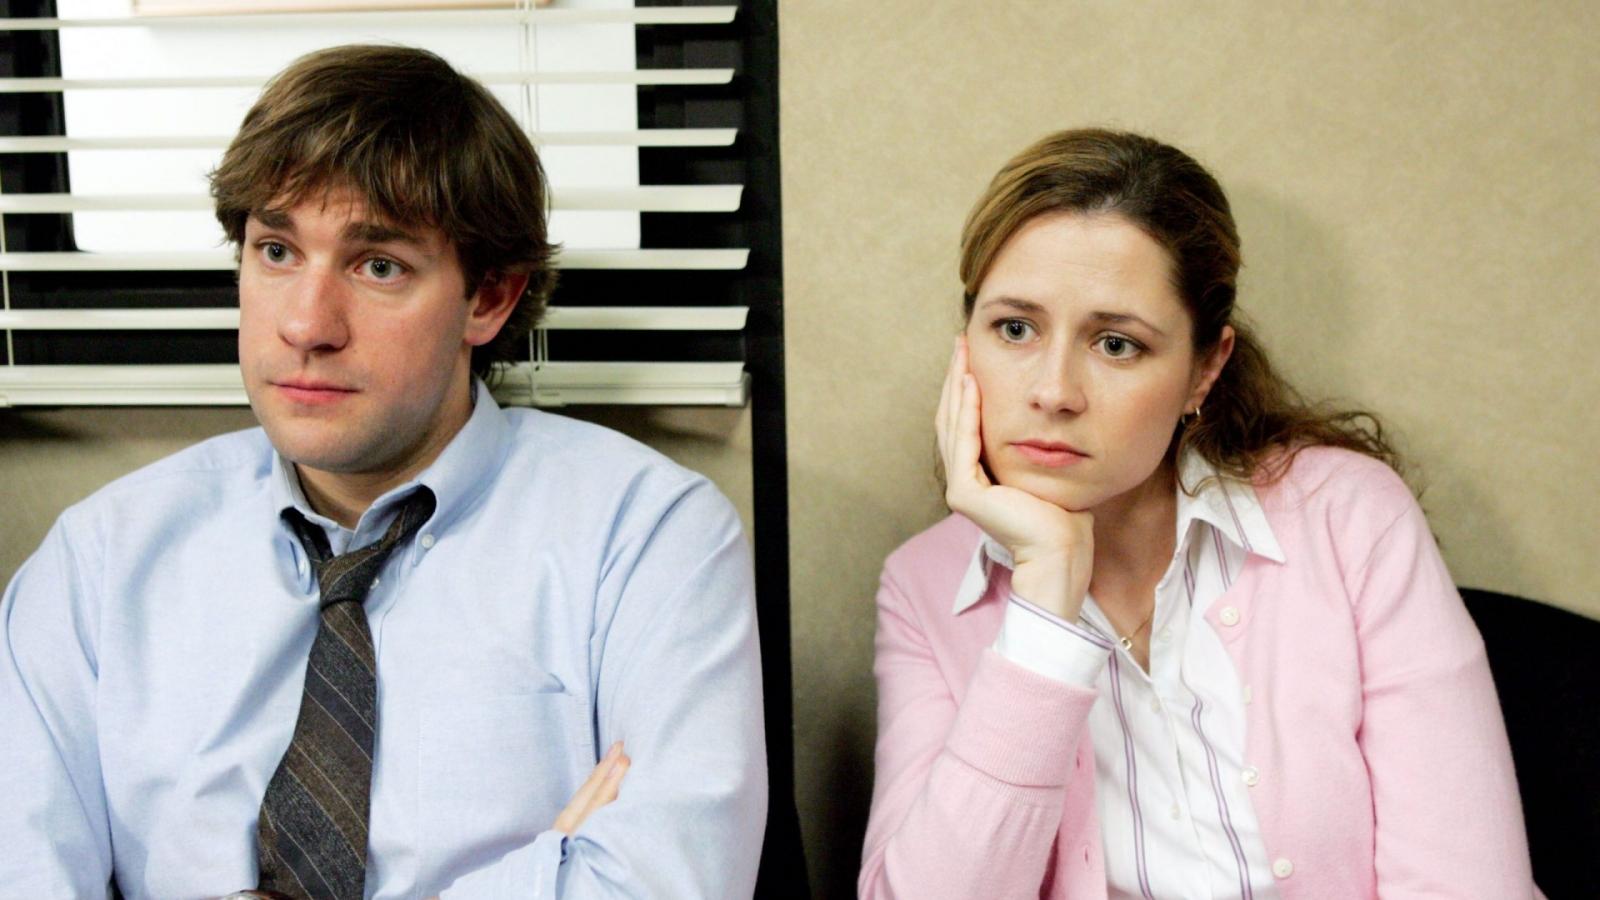 Which The Office Character Are You, Based on Your Enneagram Type? - image 2